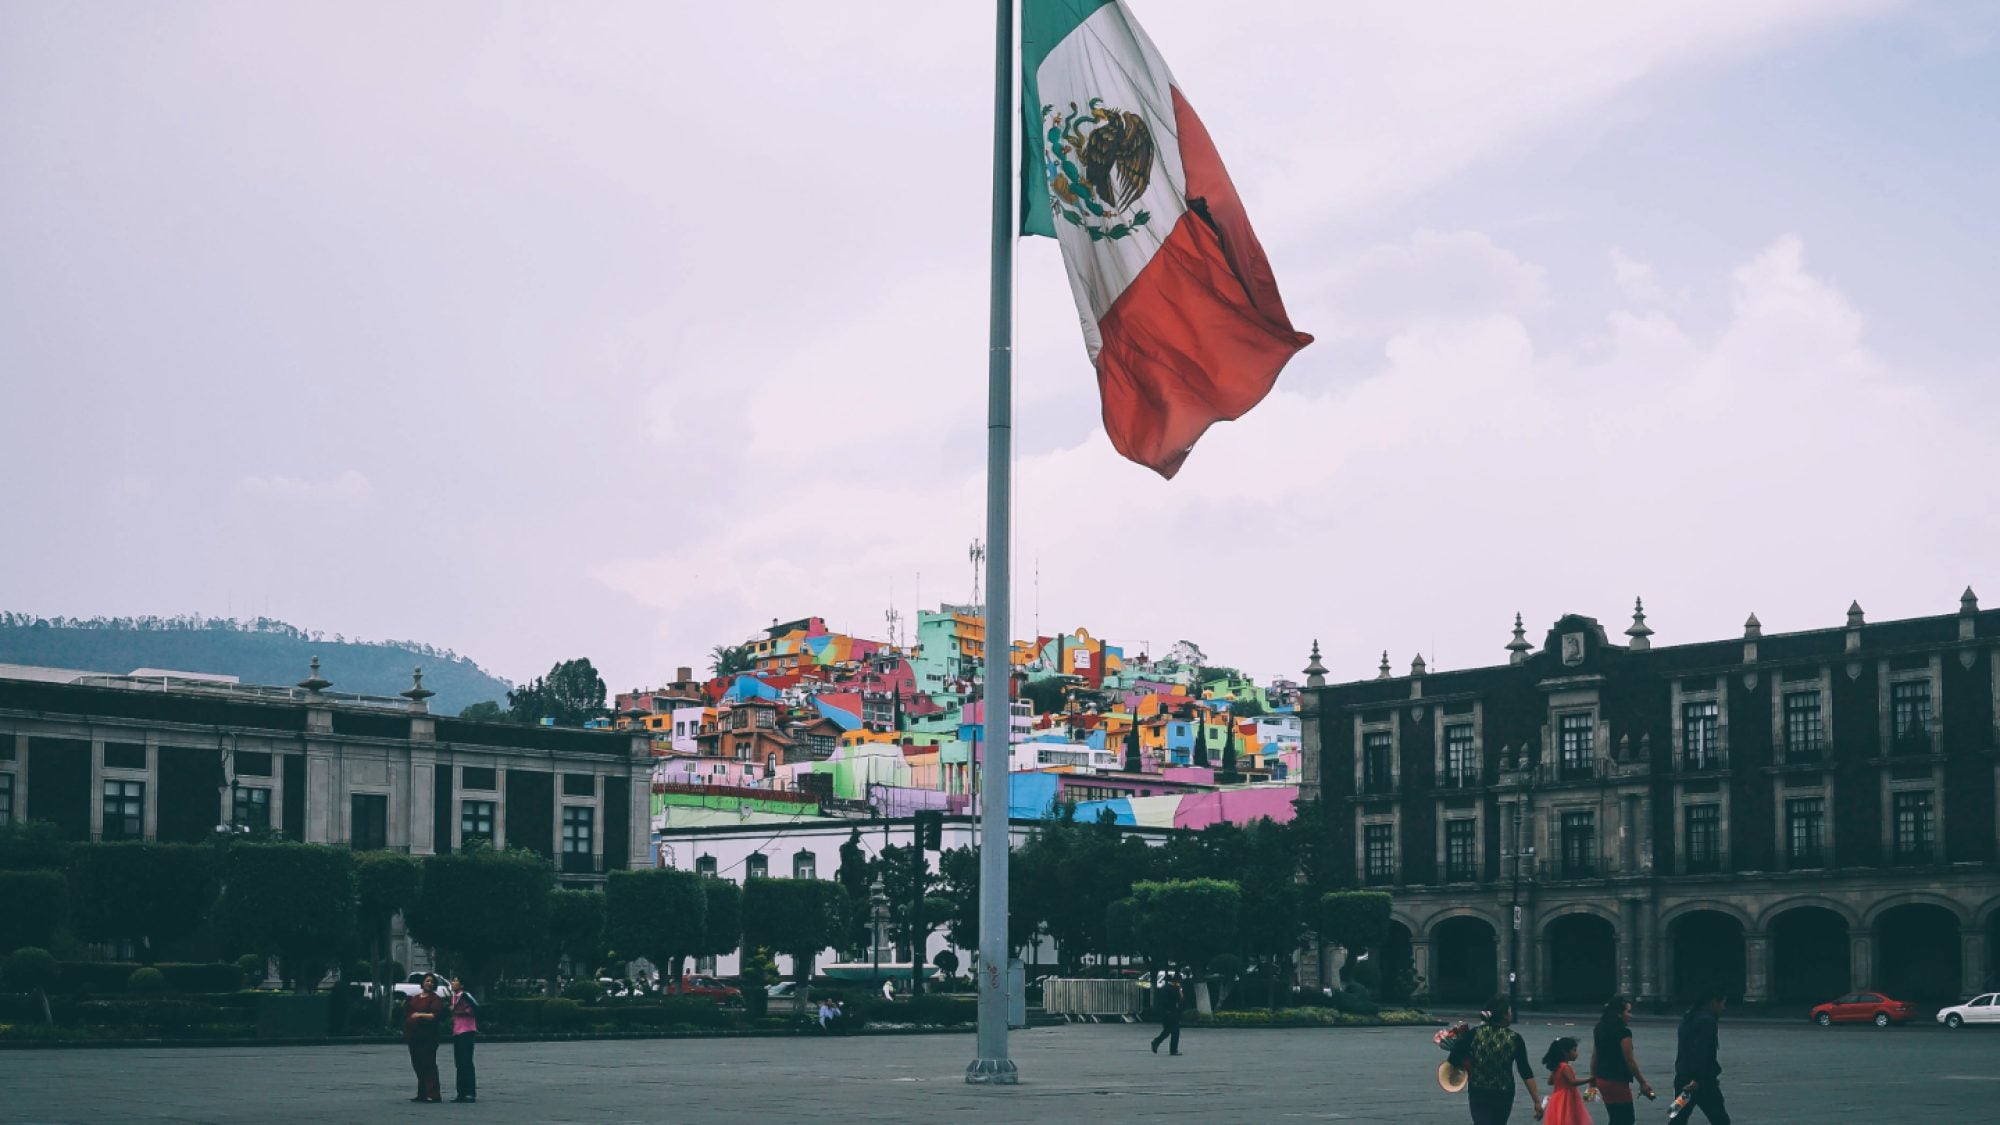 Plaza with a Mexican flag